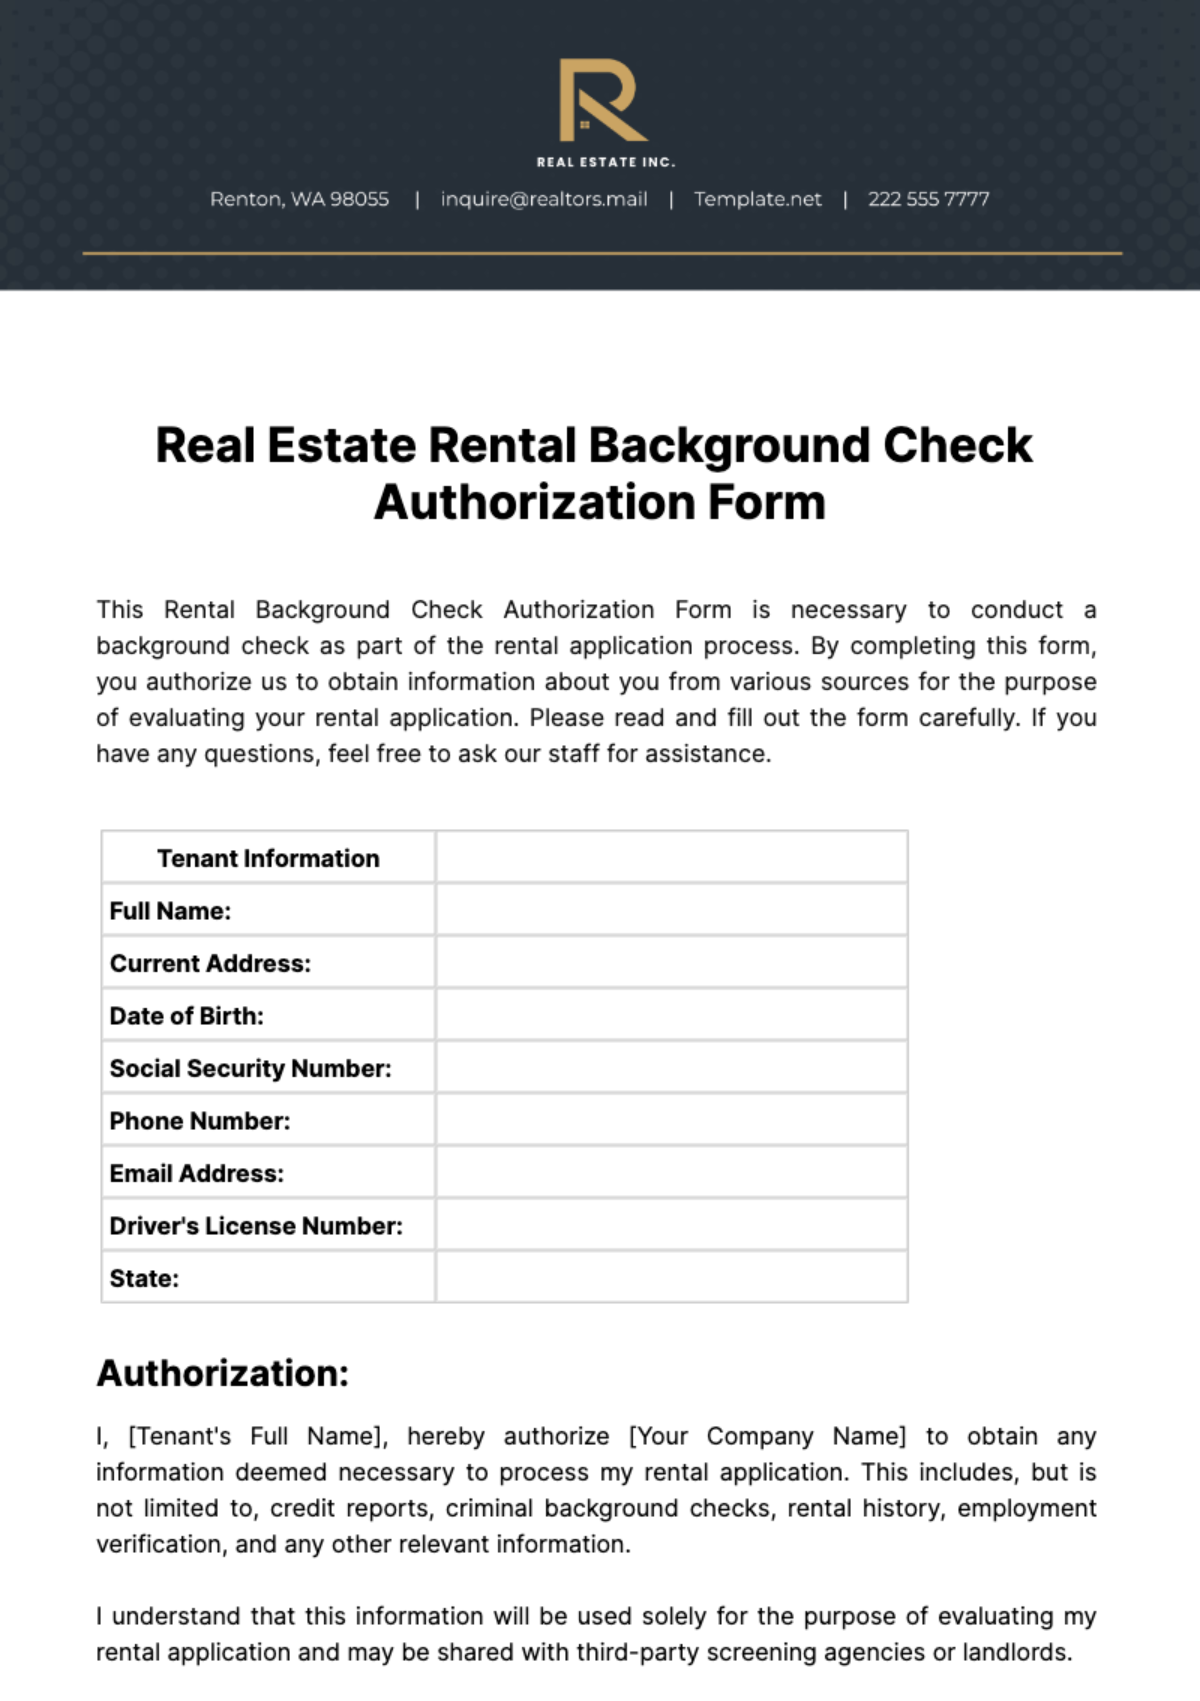 Real Estate Rental Background Check Authorization Form Template